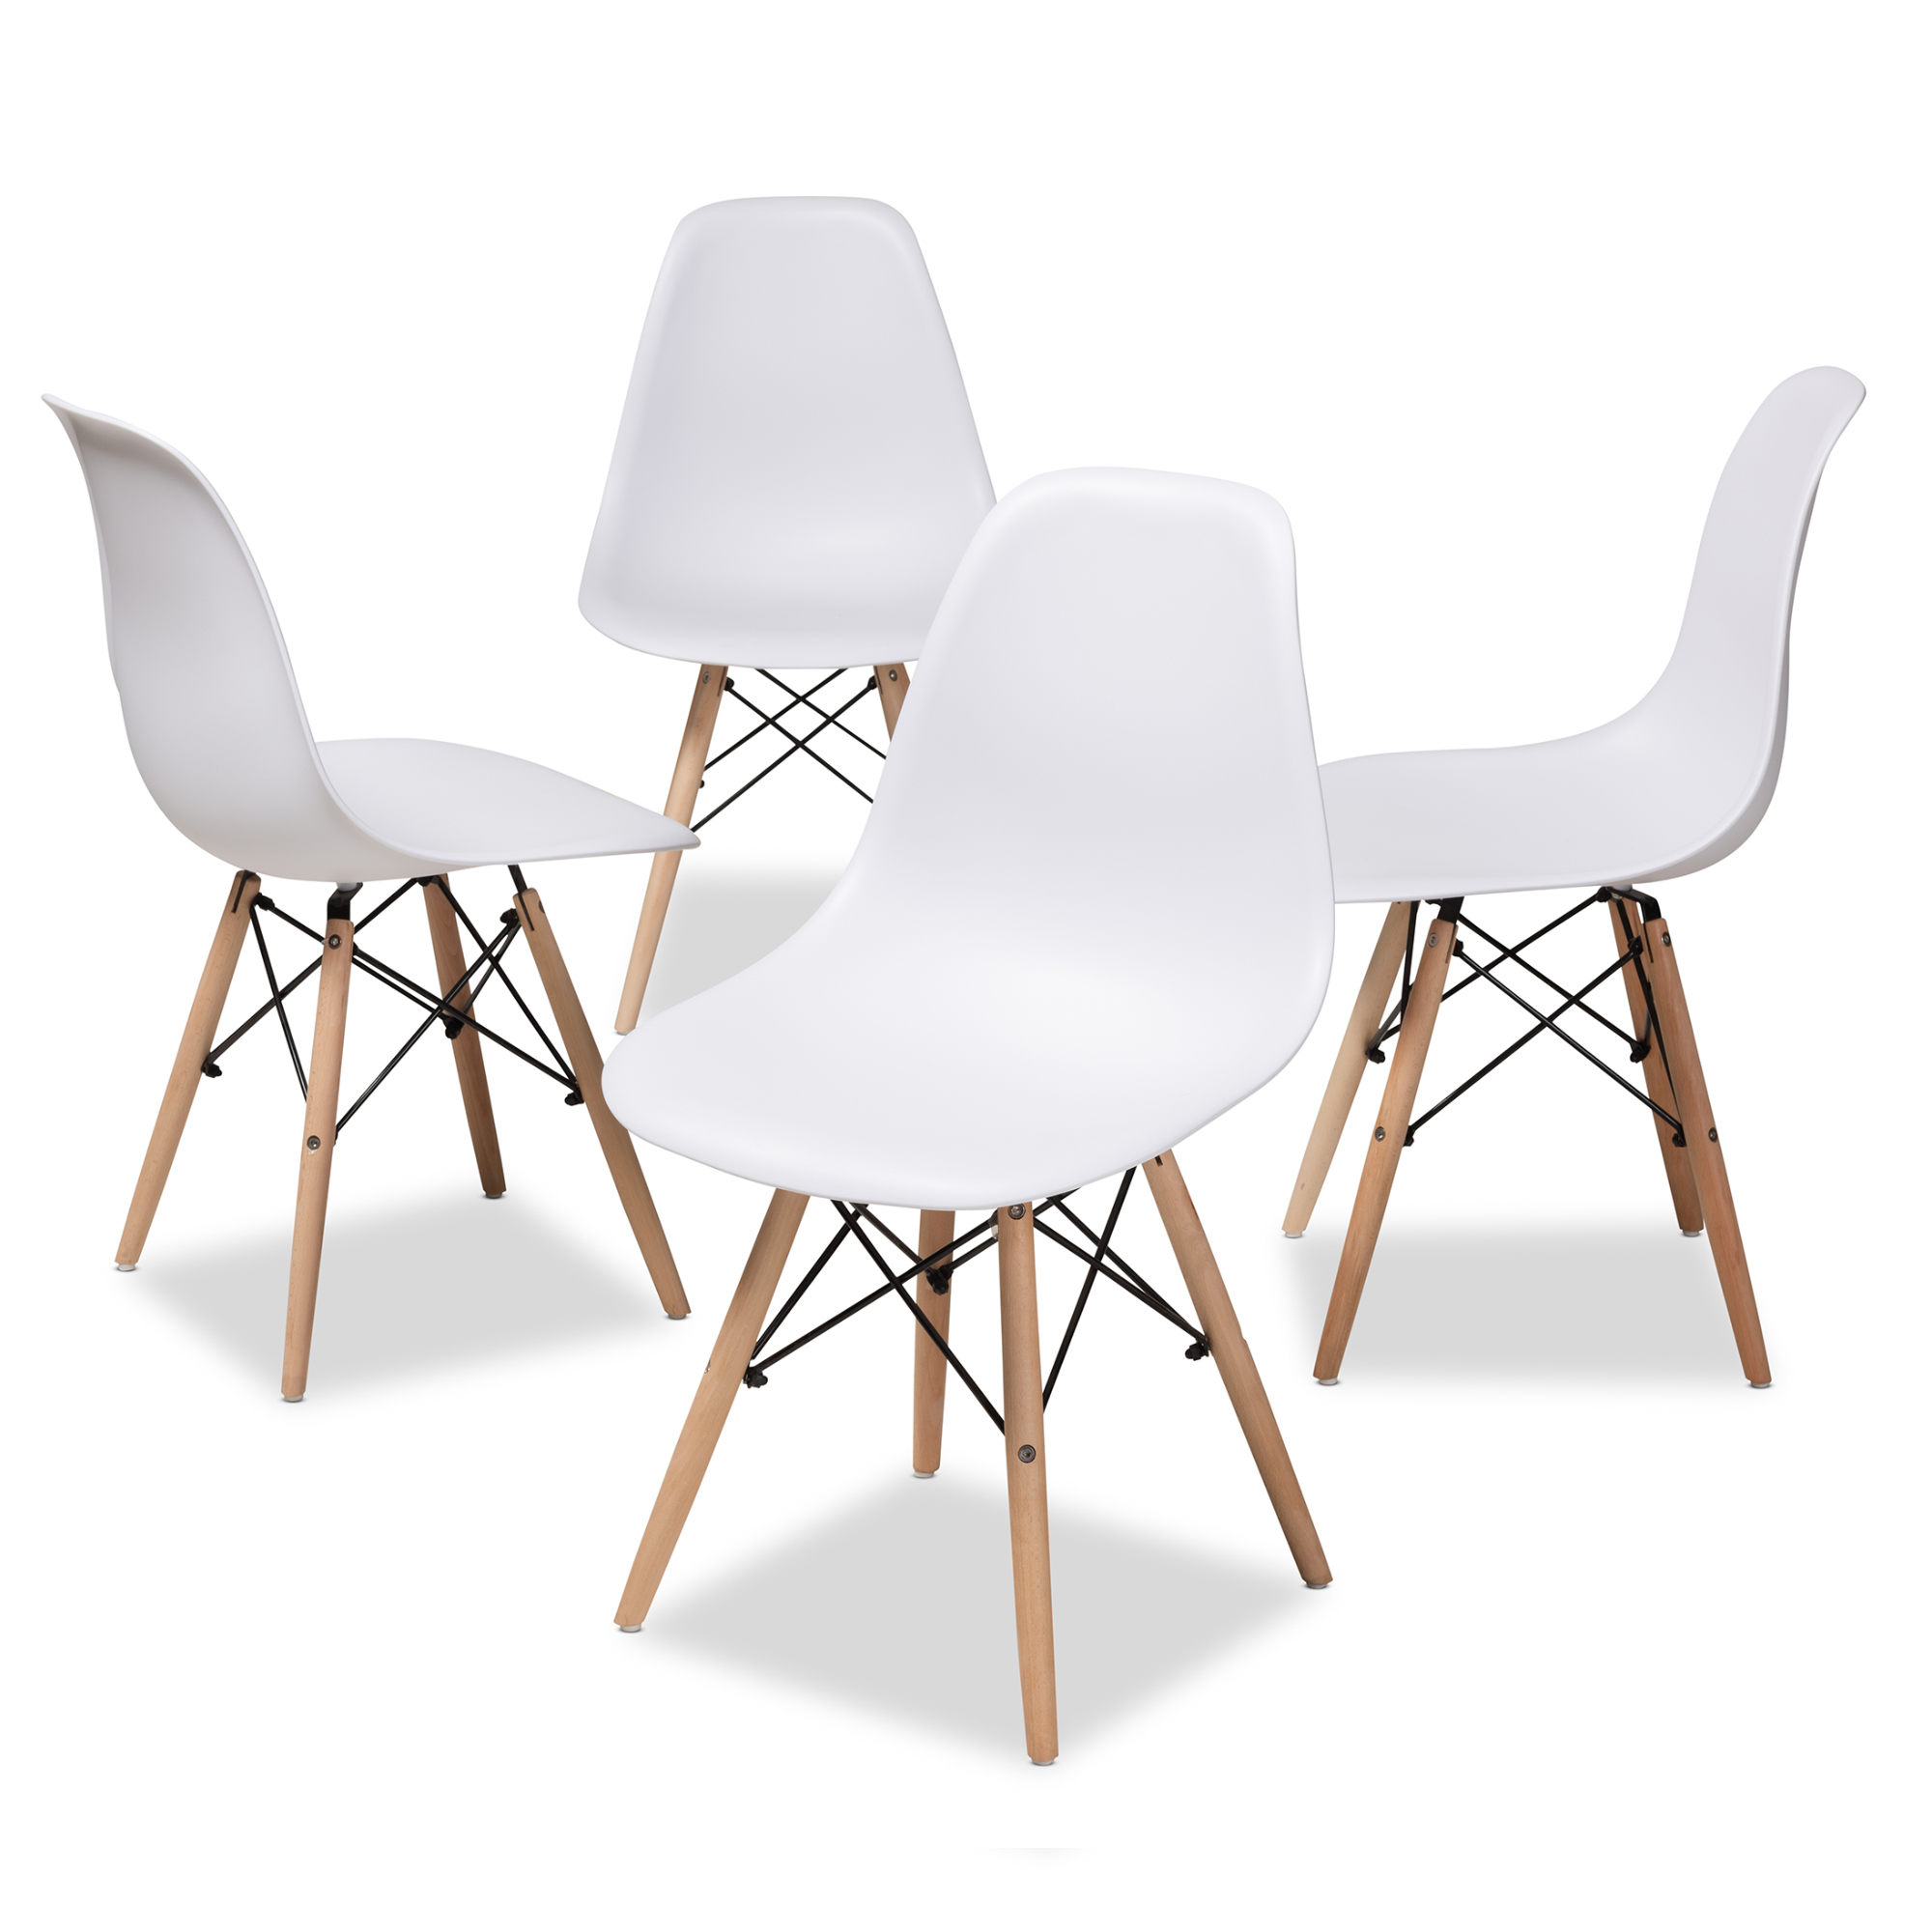 Baxton Studio Sydnea Mid-Century Modern White Acrylic Brown Wood Finished Dining Chair (Set of 4)